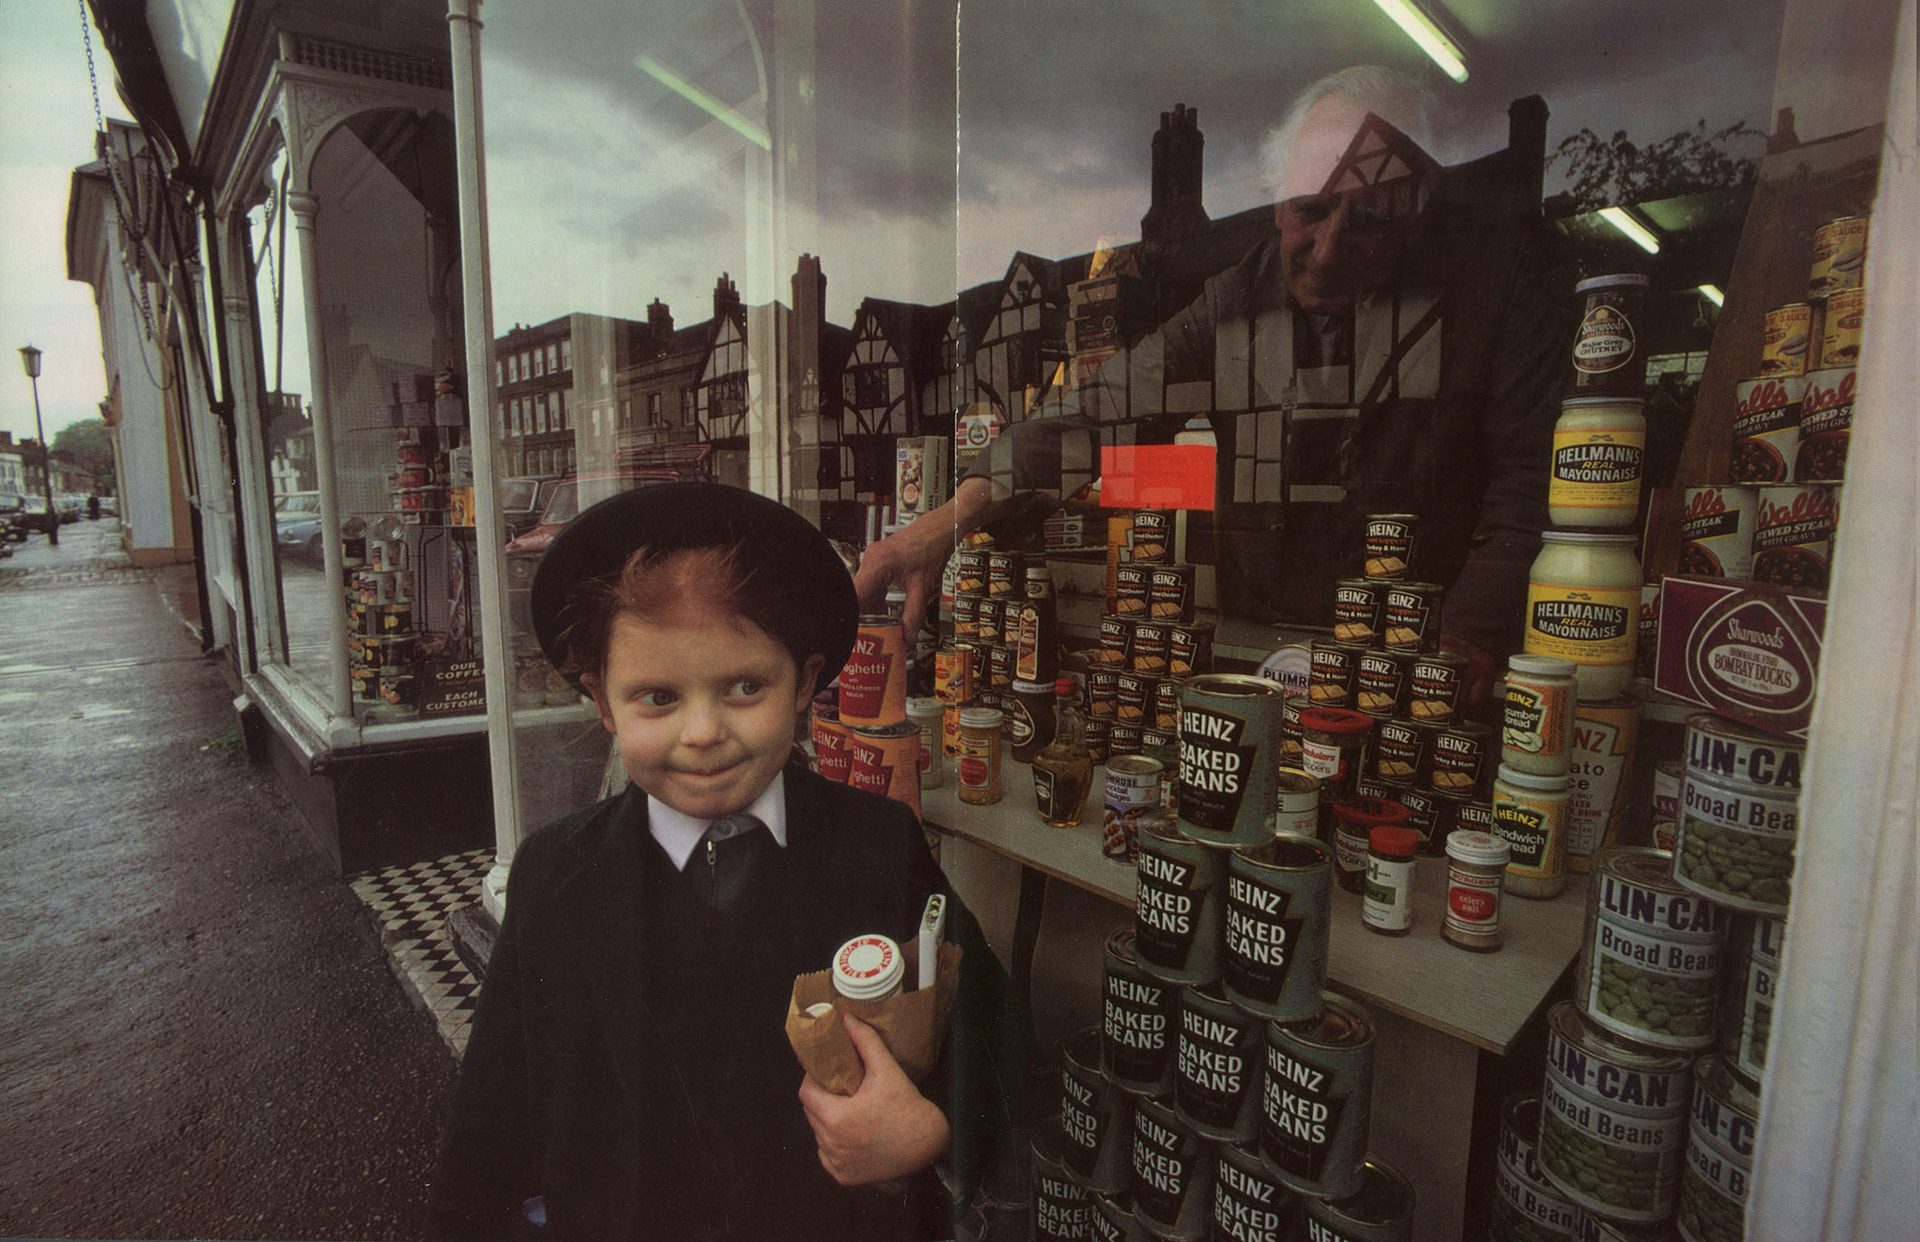 Photograph of a young person walking past a shop window filled with Heinz tins by Magnum photographer Burt Glinn